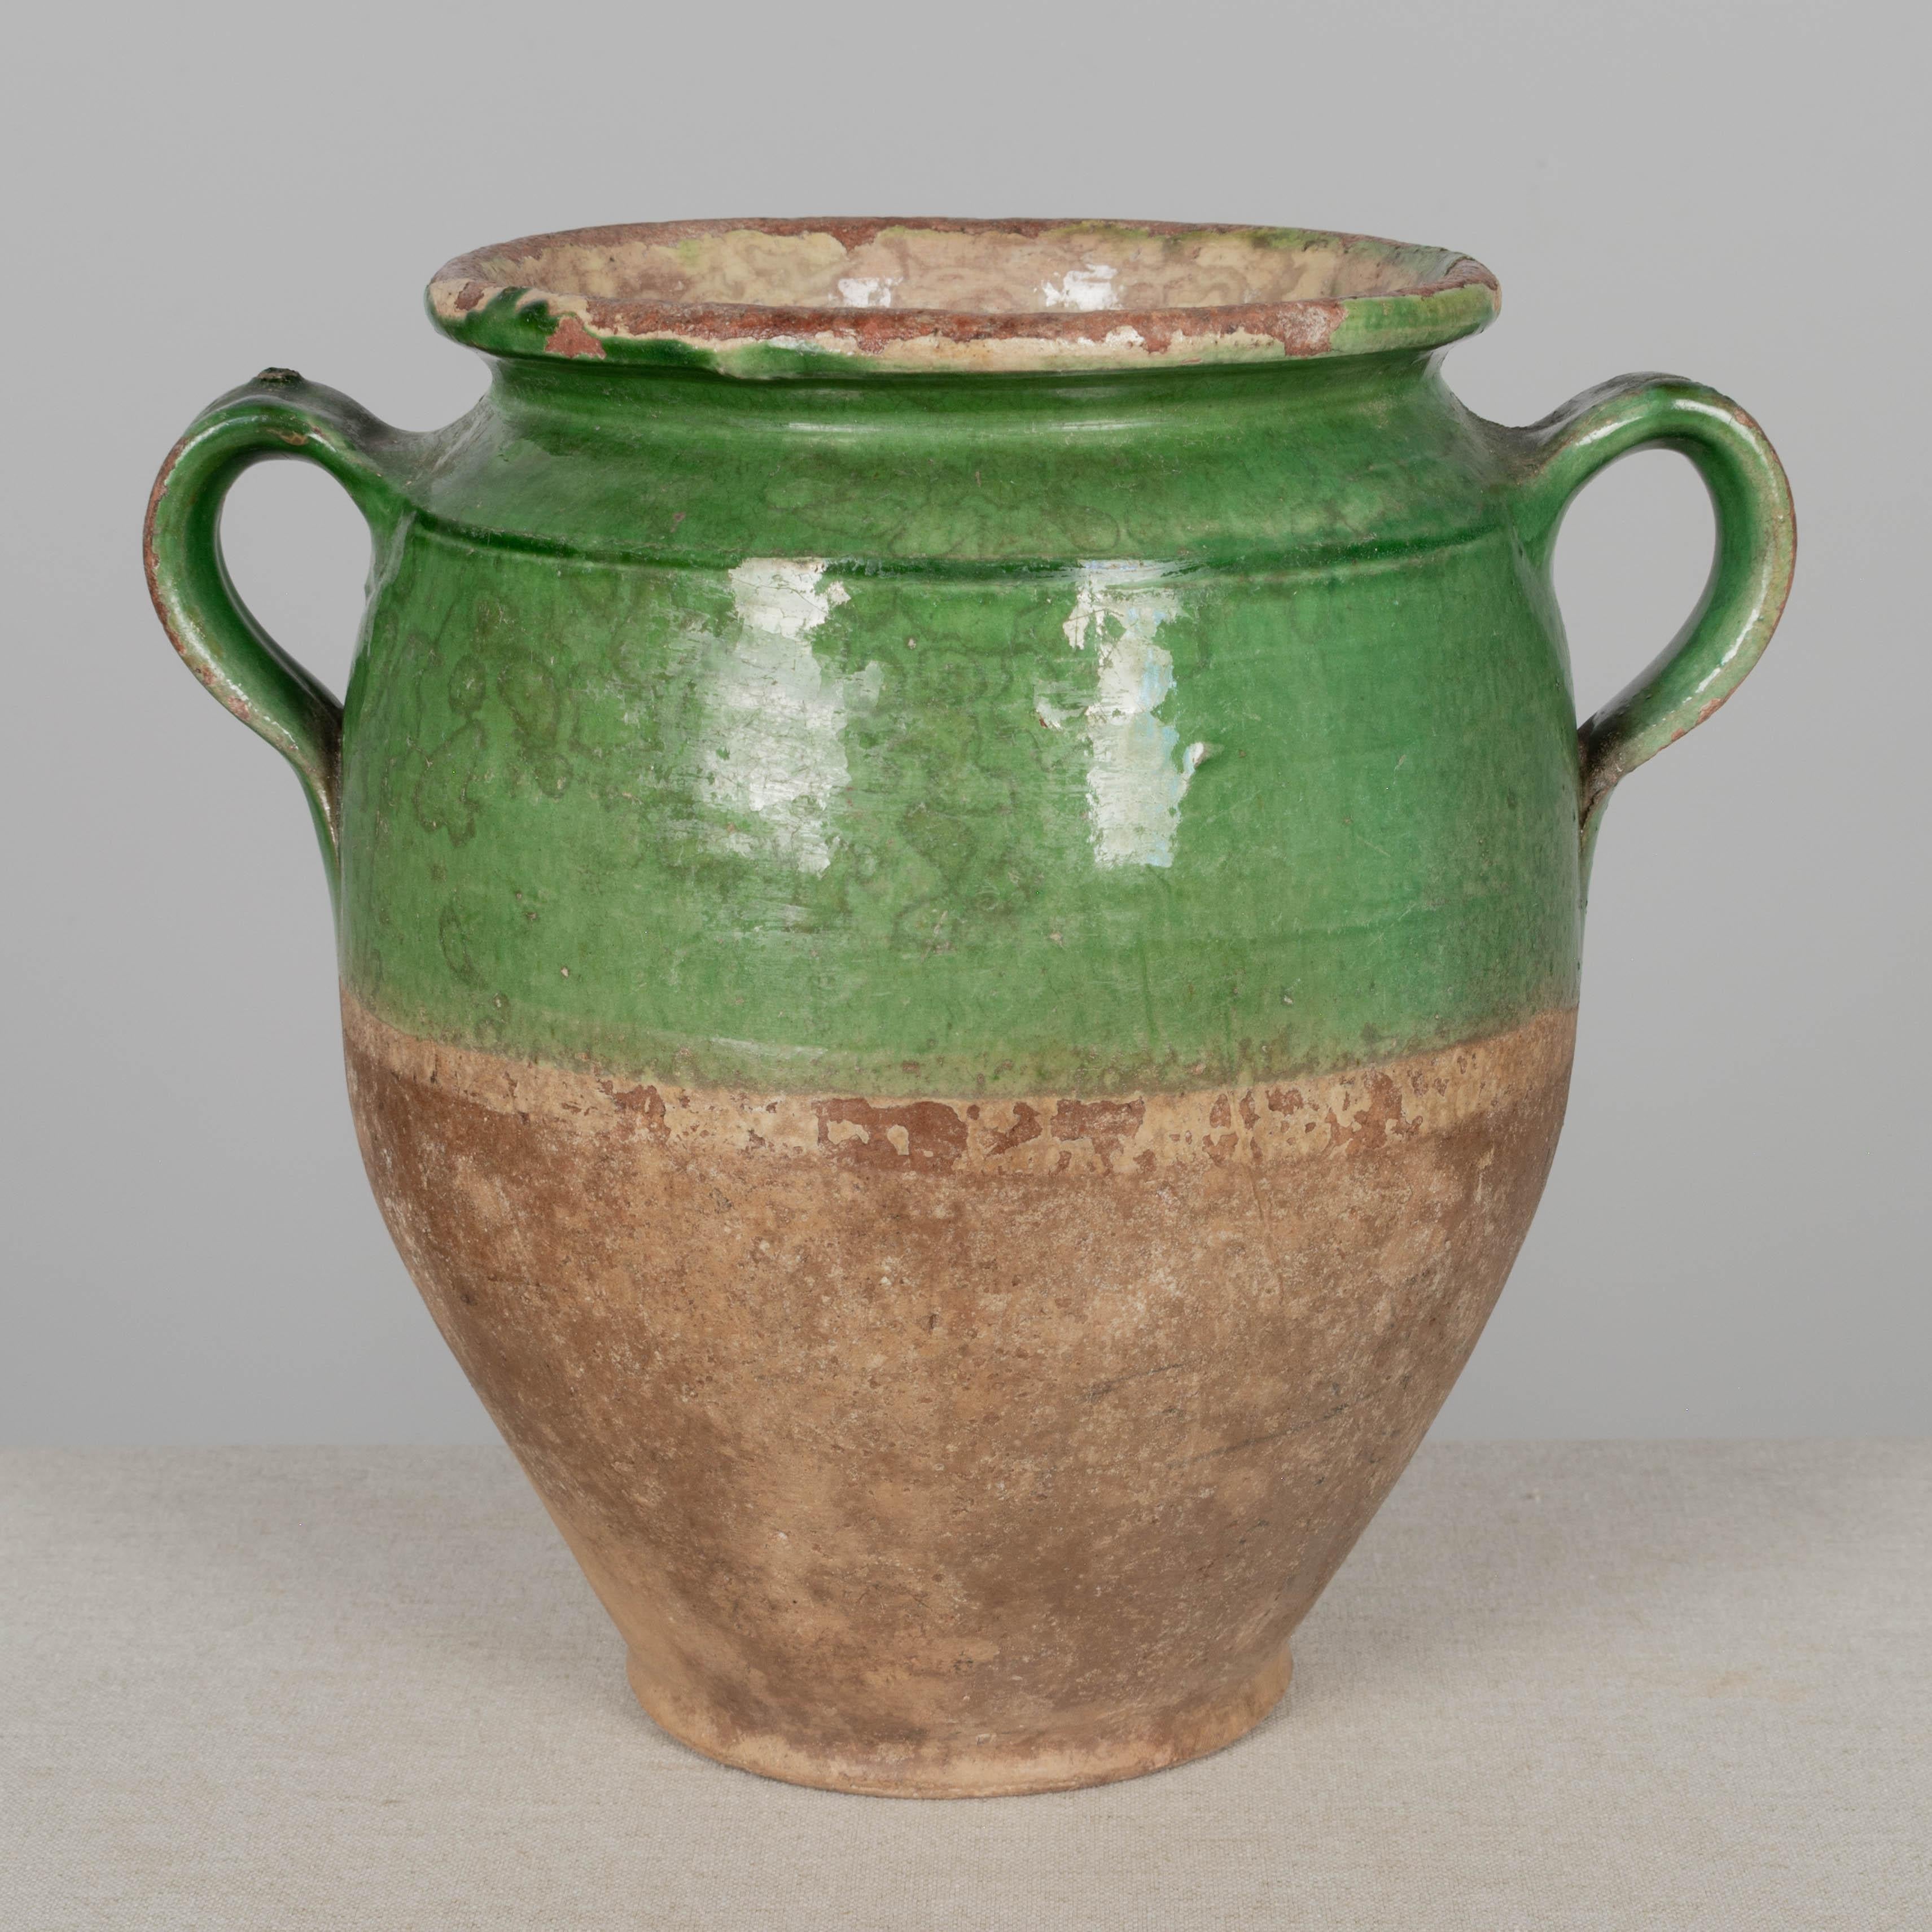 A 19th century French earthenware confit pot with traditional green glaze and pale yellow interior. Nice old patina. Chips and losses to glaze. These ordinary earthenware vessels were once used daily in the French country home and have beautiful